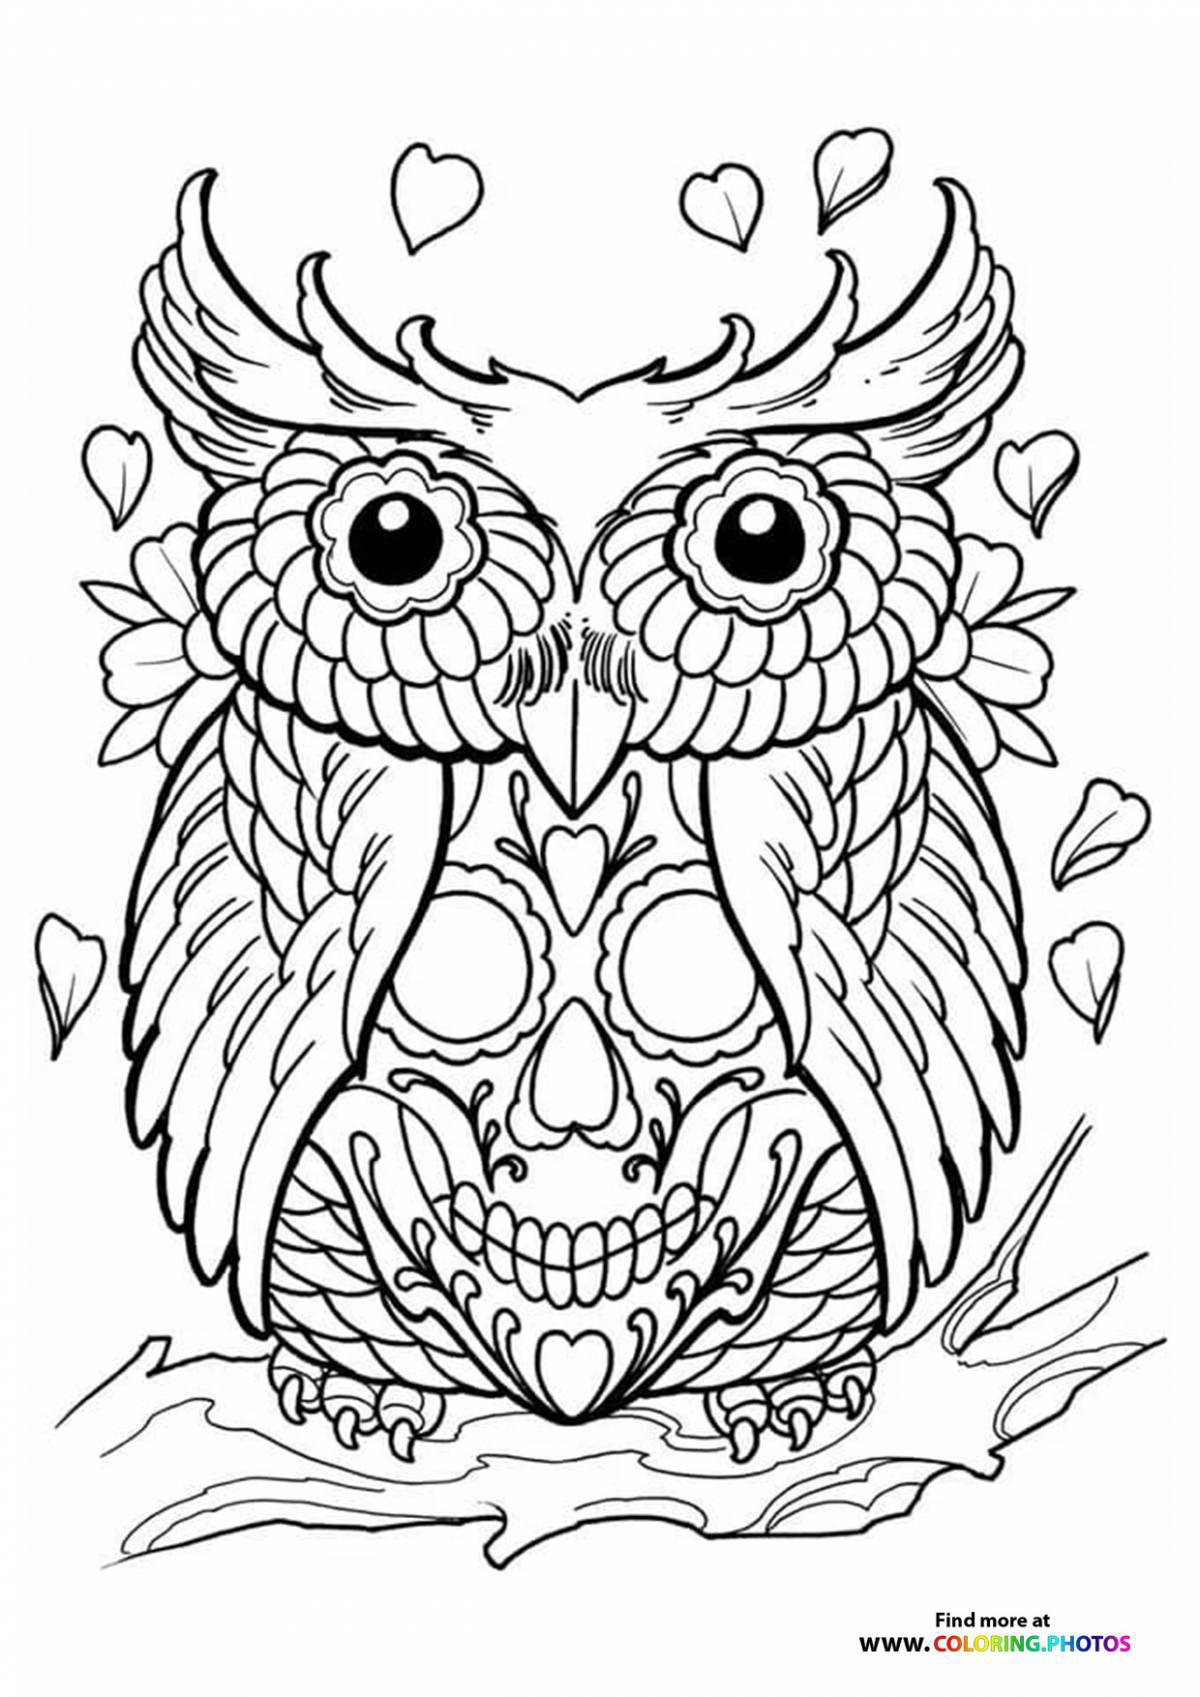 Unique tattoo coloring page